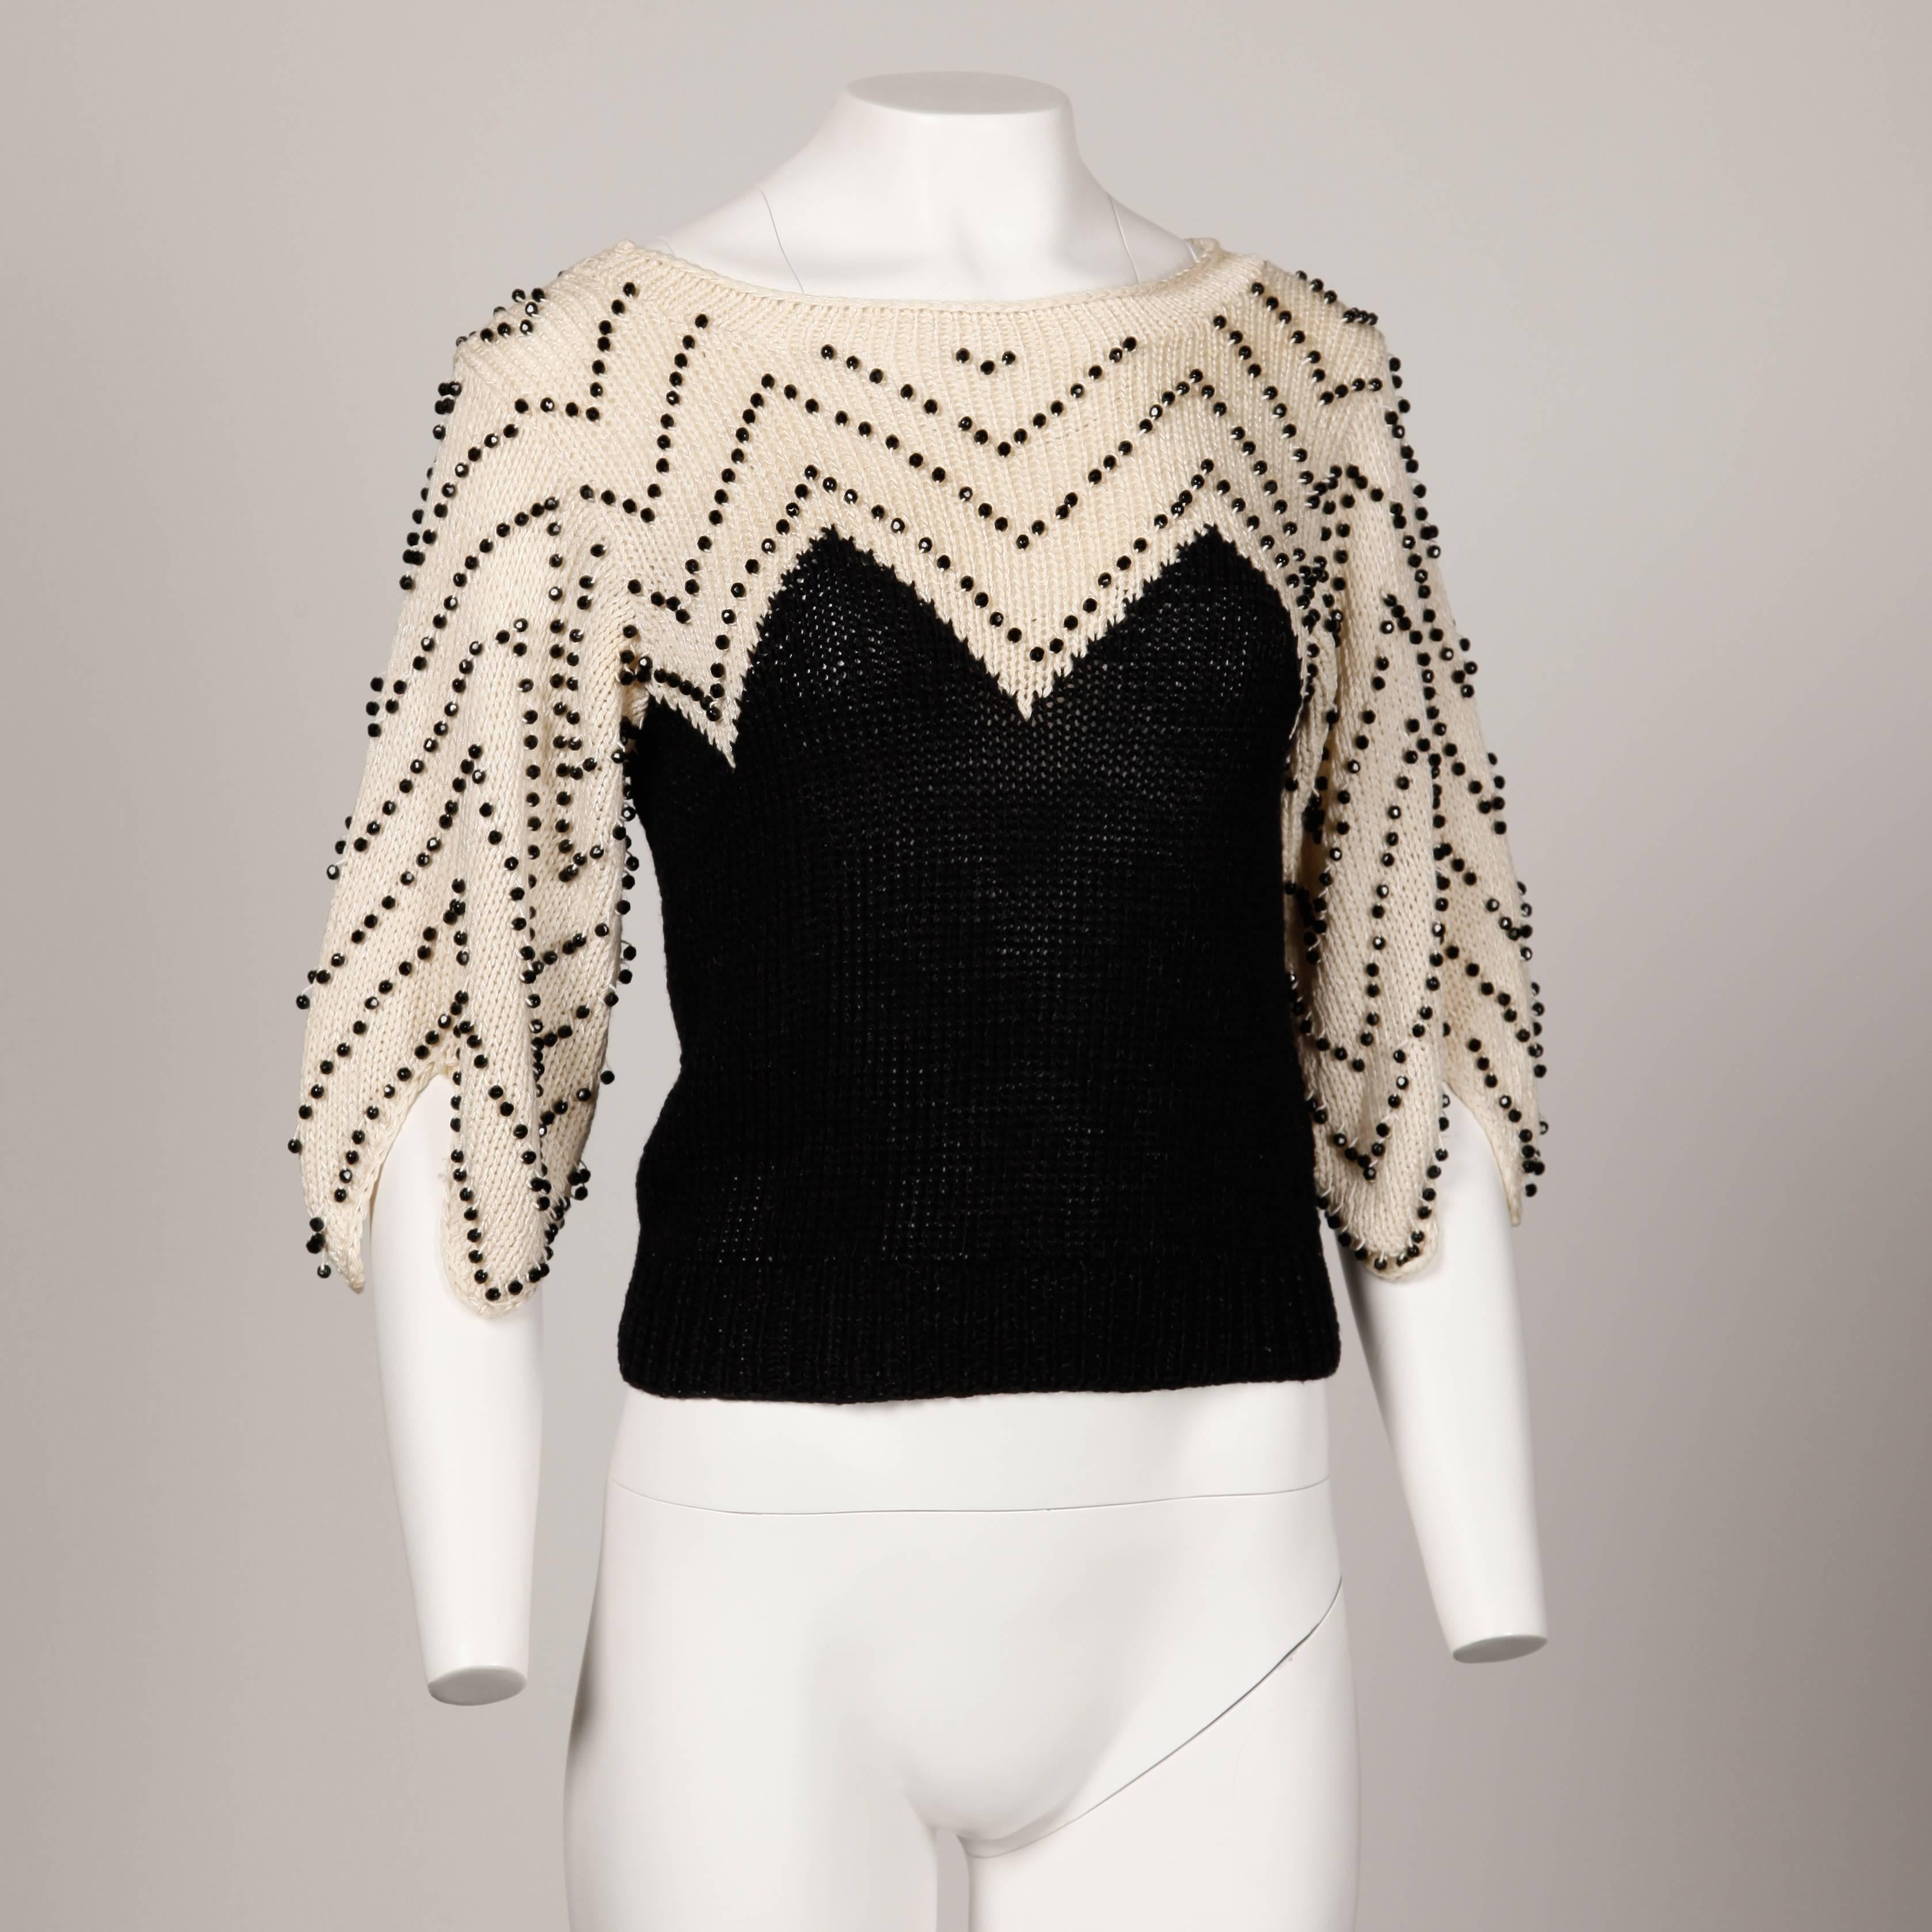 Incredible hand knit sweater top with heavy chevron beadwork and jagged sleeves by Lillie Rubin. Unlined. Fabric content is 50% acrylic, 42% rayon, 8% wool. The marked size is small and the sweater fits true to size. The bust measures 34-38